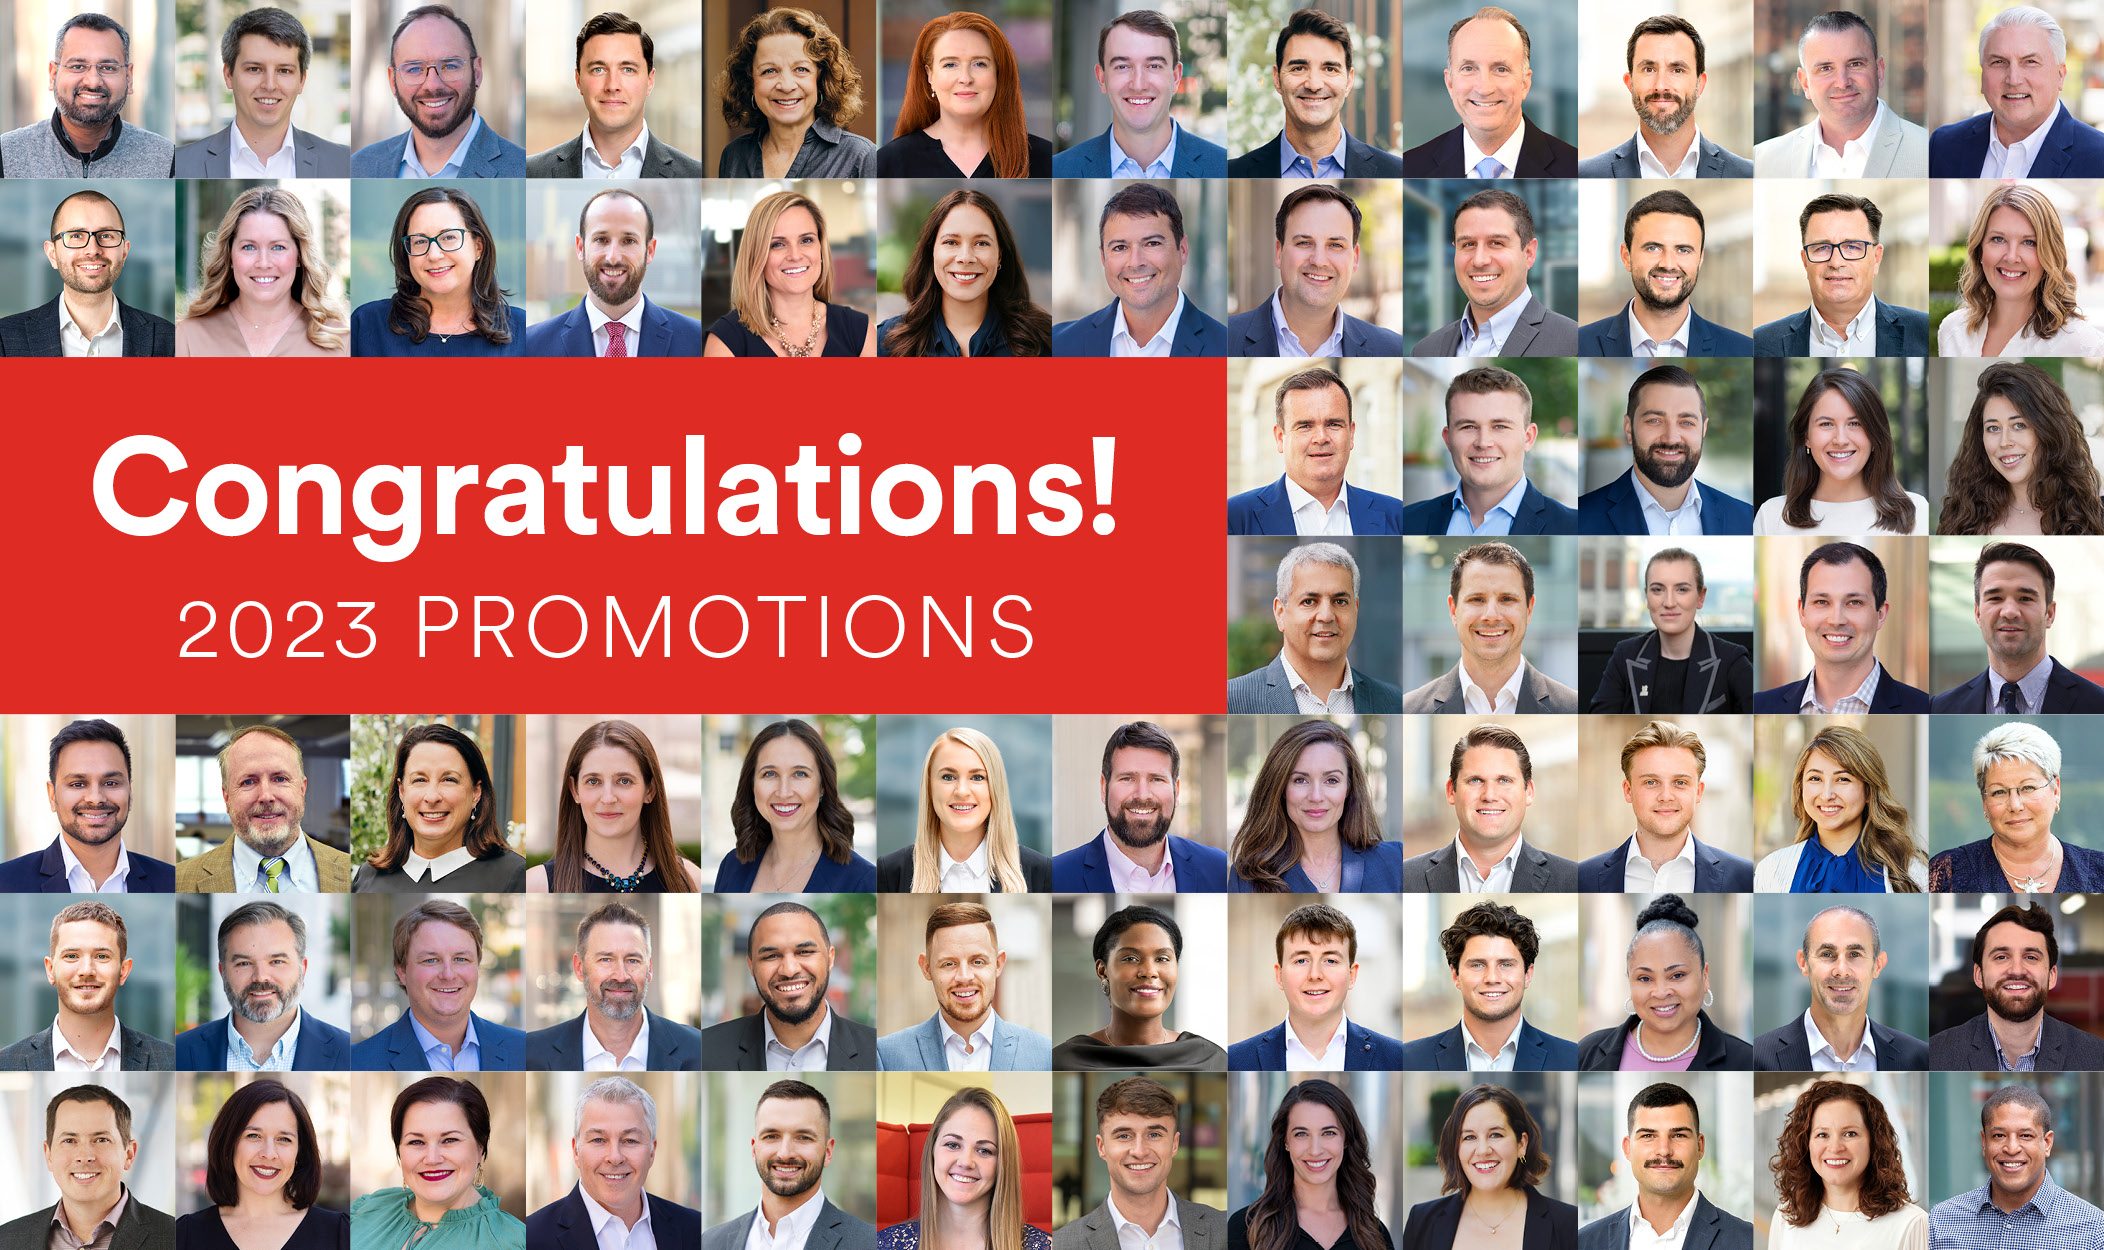 MGAC Promotions. Text reads "contragulations! 2023 Promotions" on a red banner, surrounded by staff headshots.